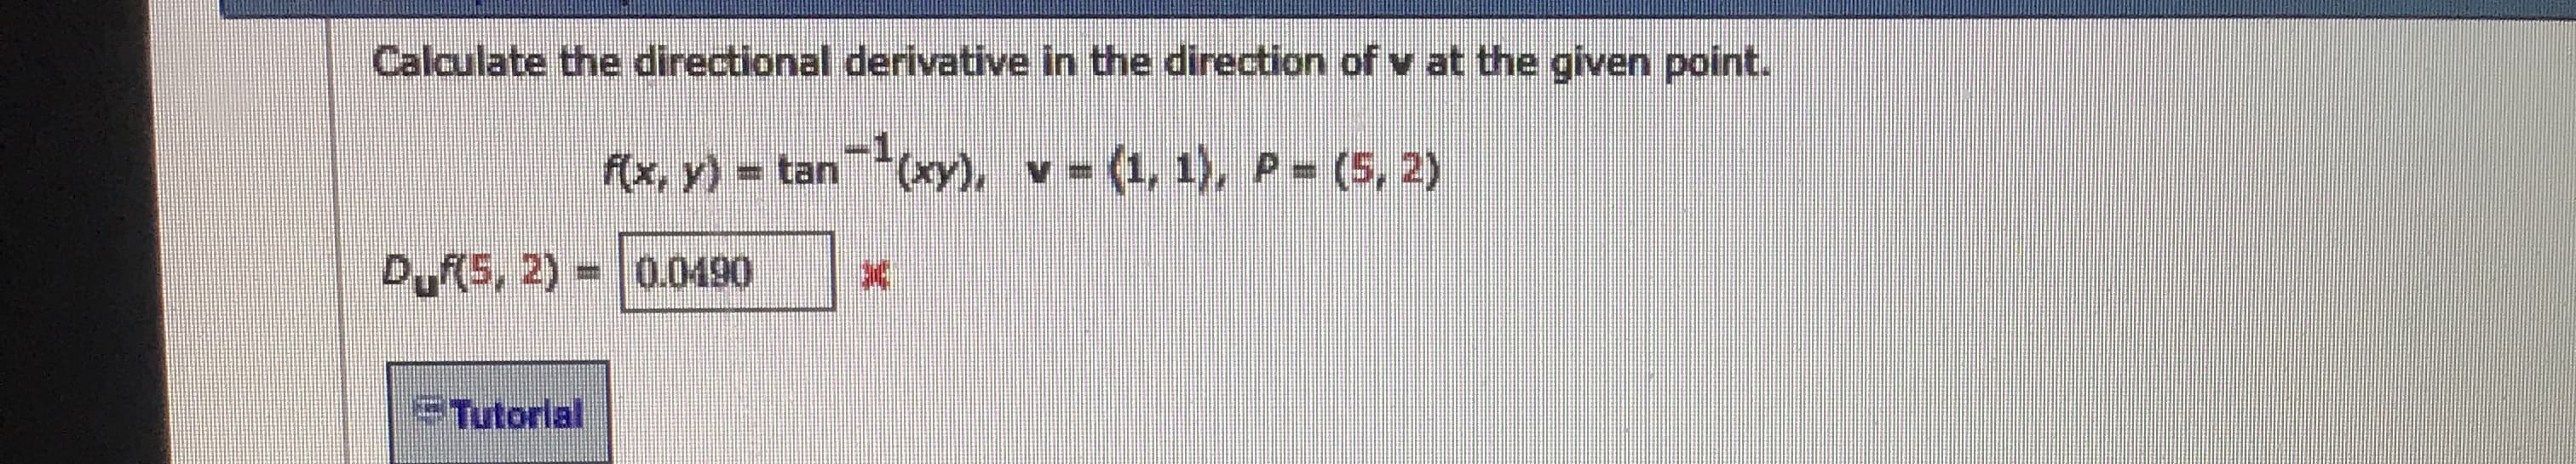 Calculate the directional derivative in the direction of v at the given point.
fx, v)- tan Cy). -(1, 1), P-(5, 2)
06P00(z sPa
eTutorial
